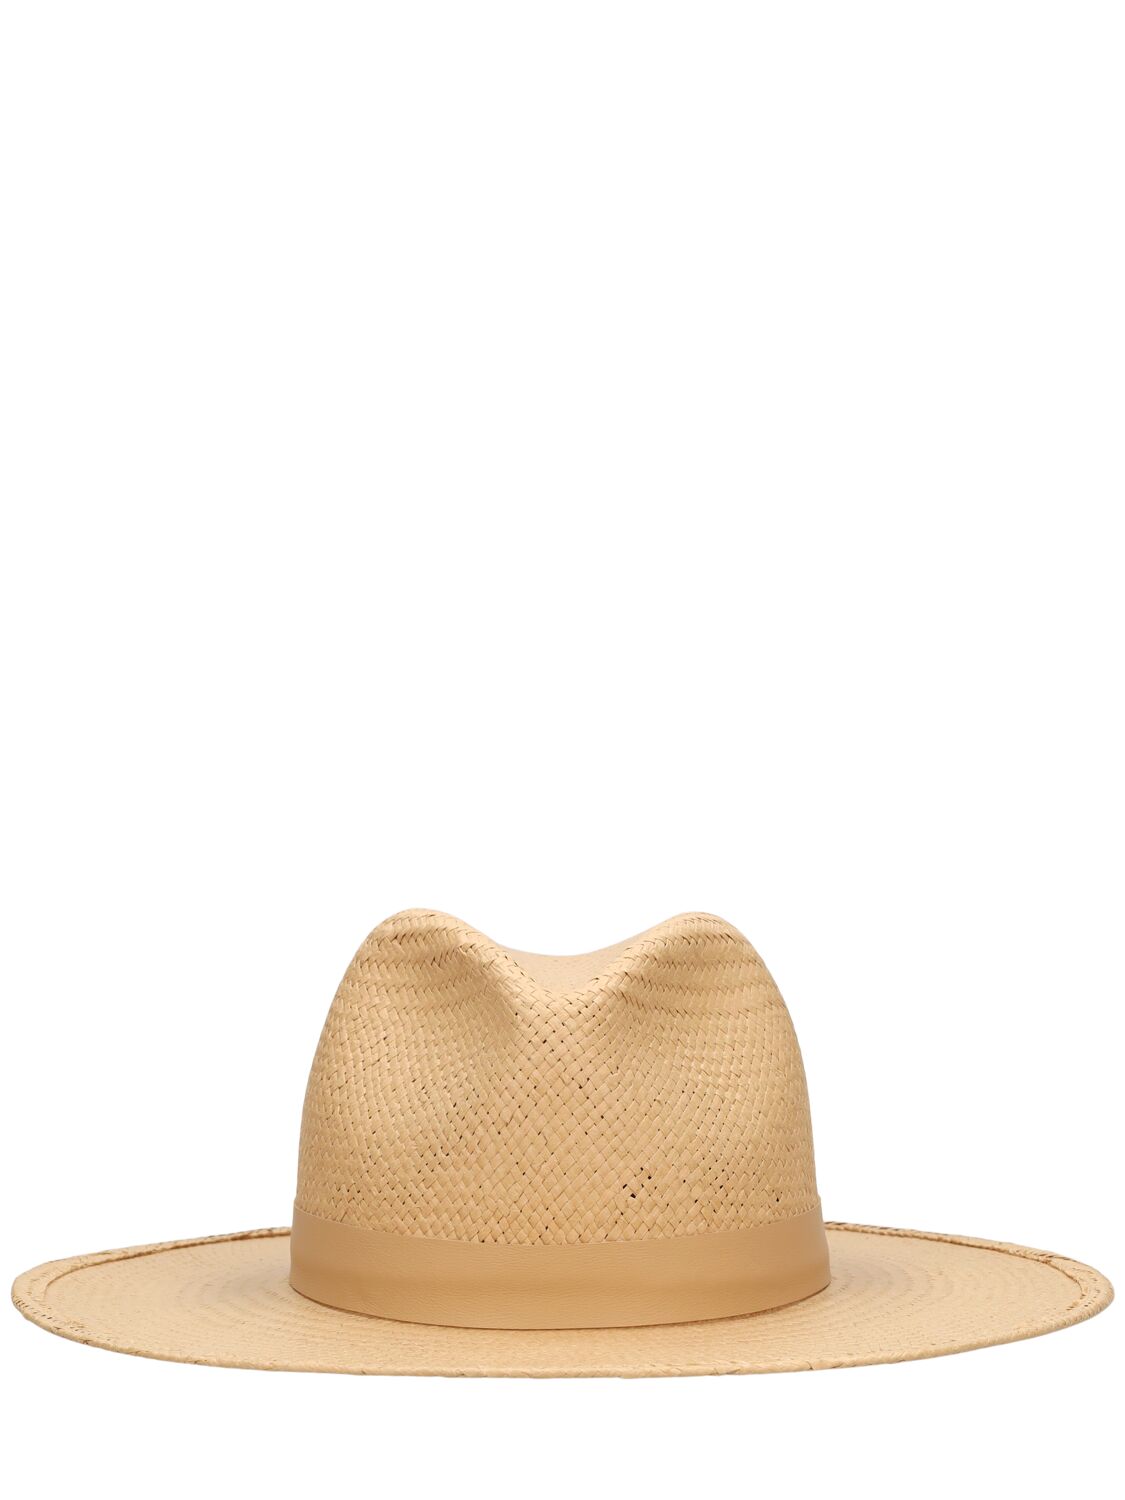 Image of Simone Packable Fedora Hat